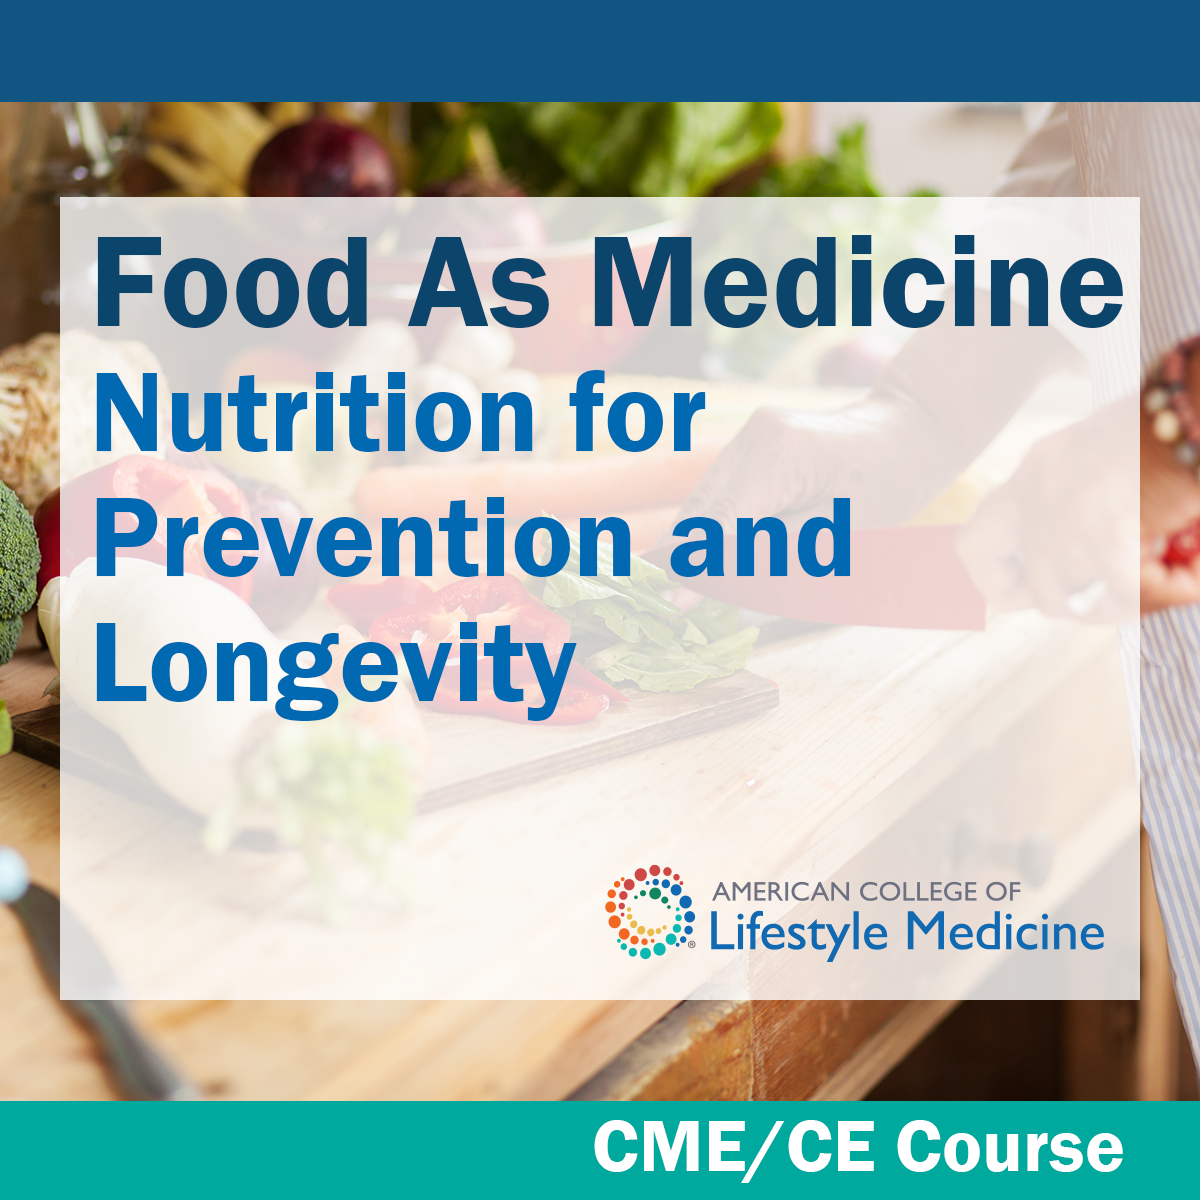 Nutritional practices for injury prevention and longevity